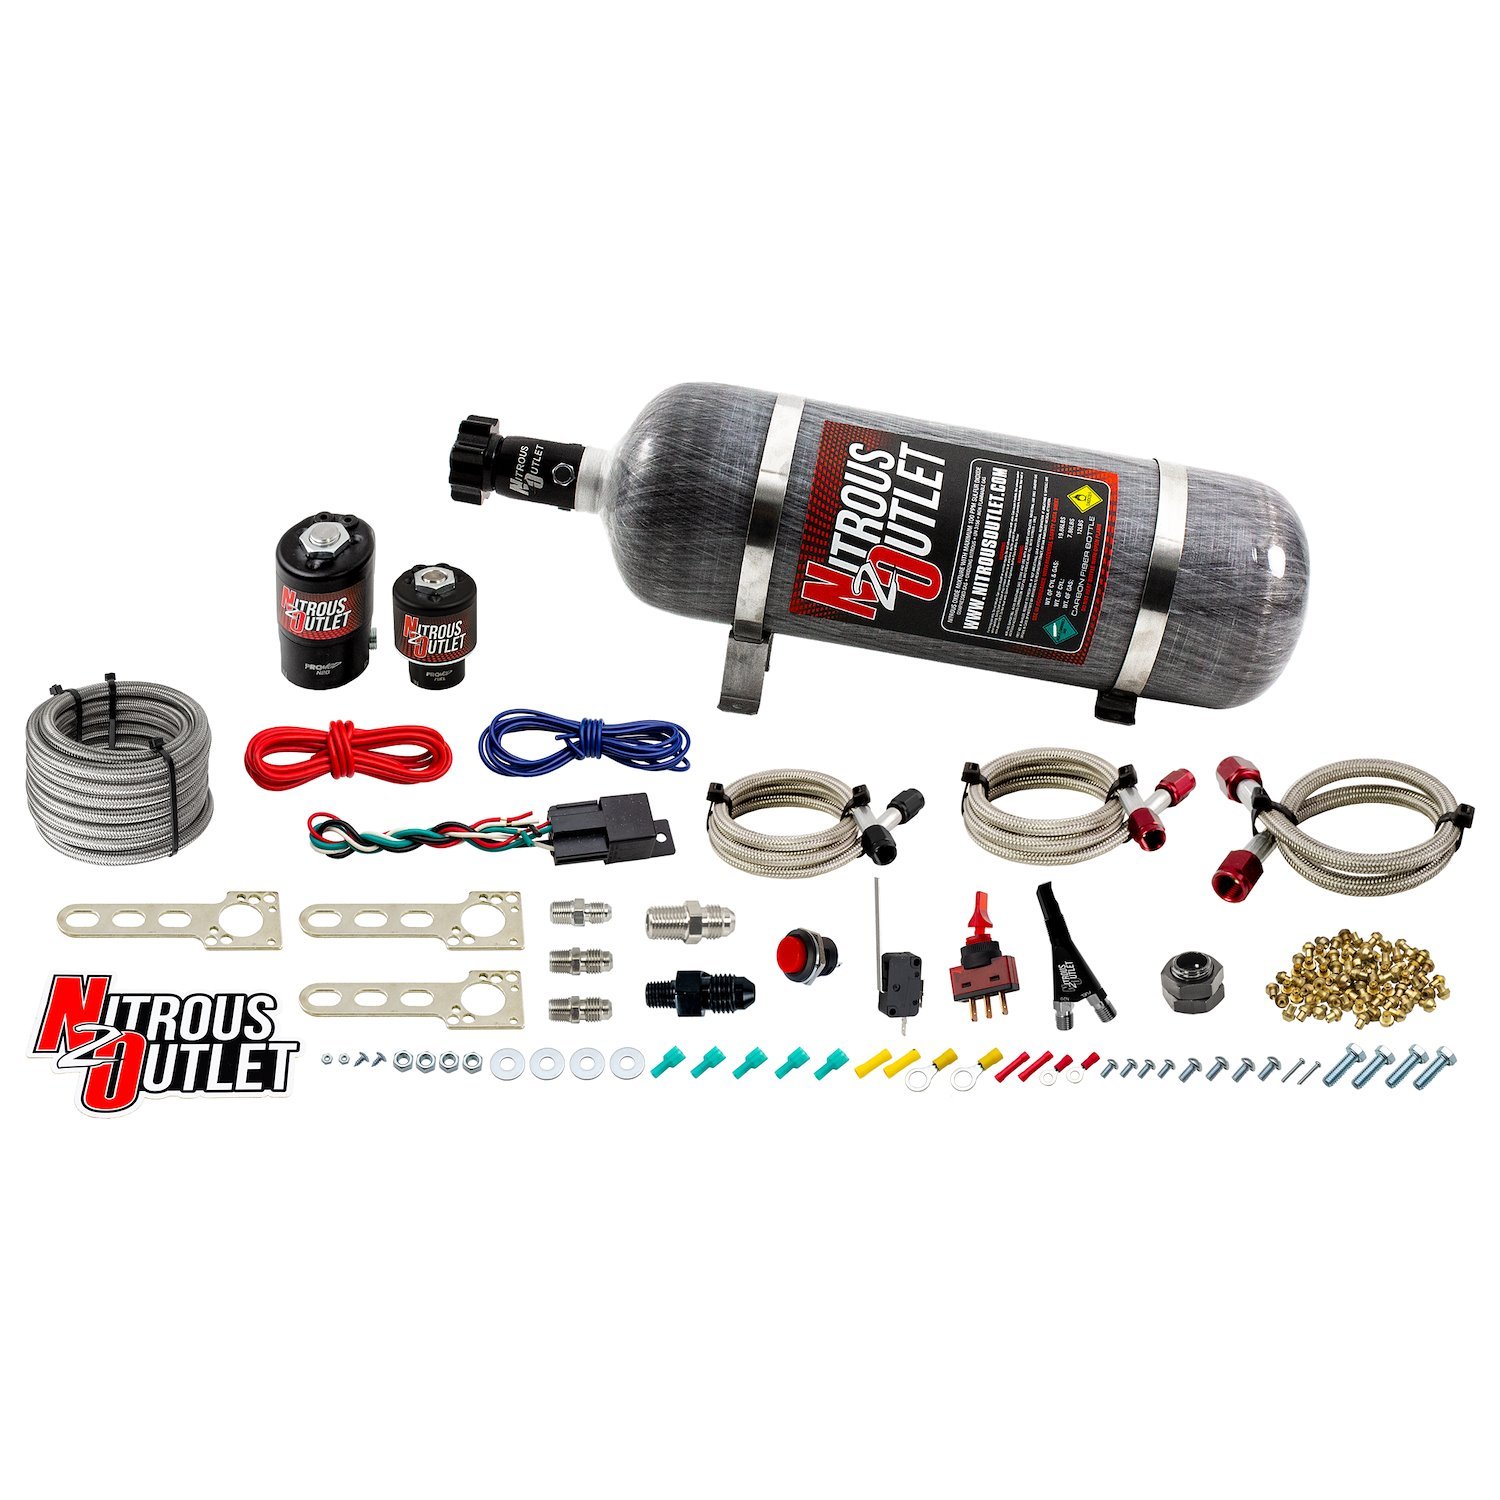 00-10010-12 EFI Single-Nozzle System, 1987-1998 Ford Mustang, Gas/E85, 5-55psi, 35-200HP, 12lb Bottle